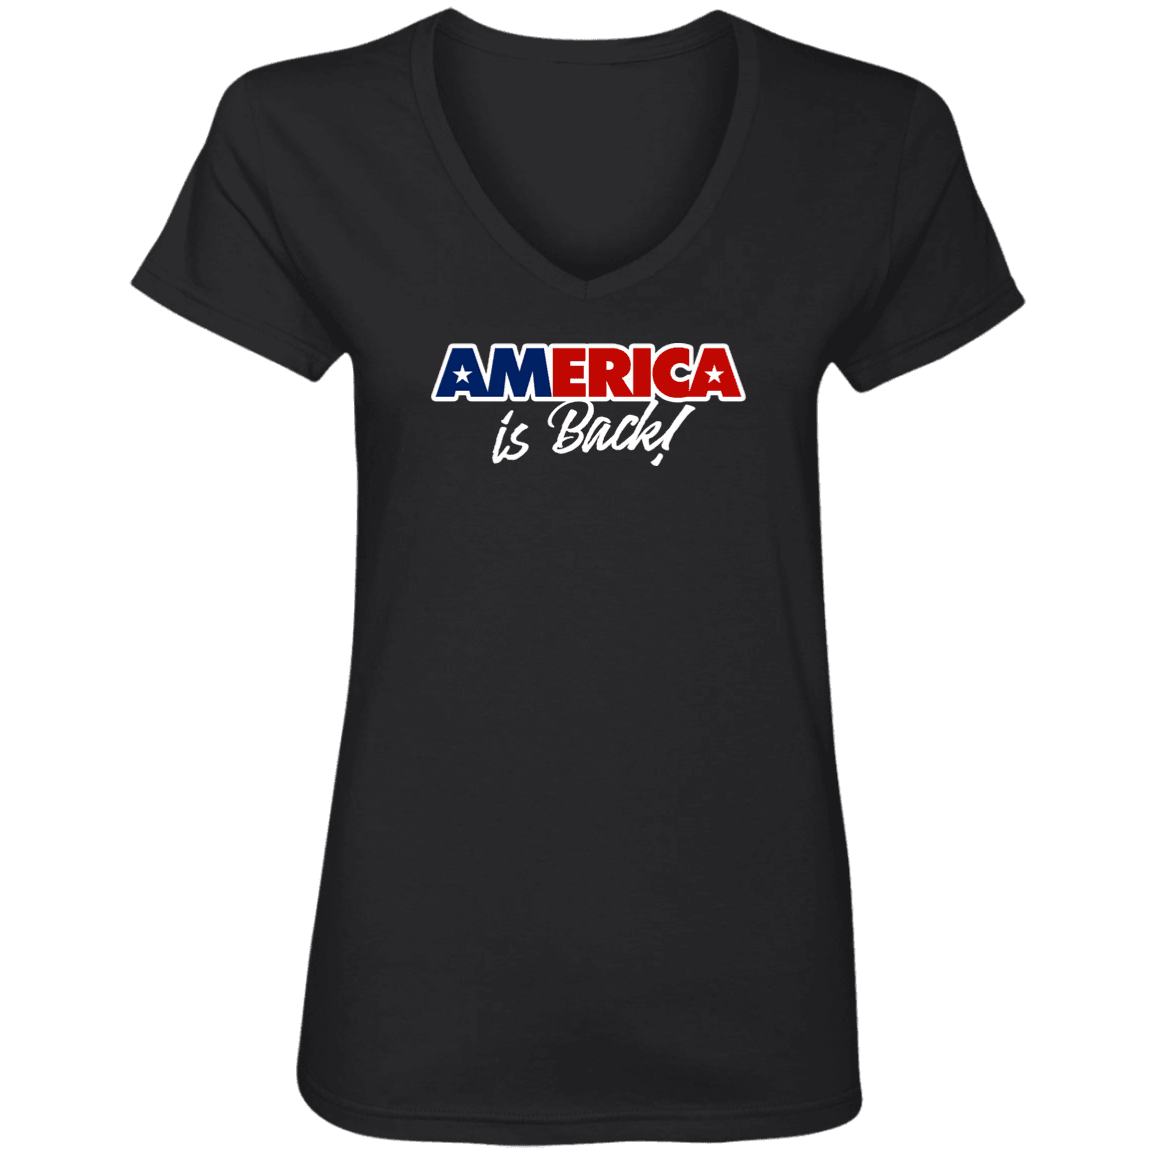 Designs by MyUtopia Shout Out:America Is Back Ladies' V-Neck T-Shirt,Black / S,Ladies T-Shirts